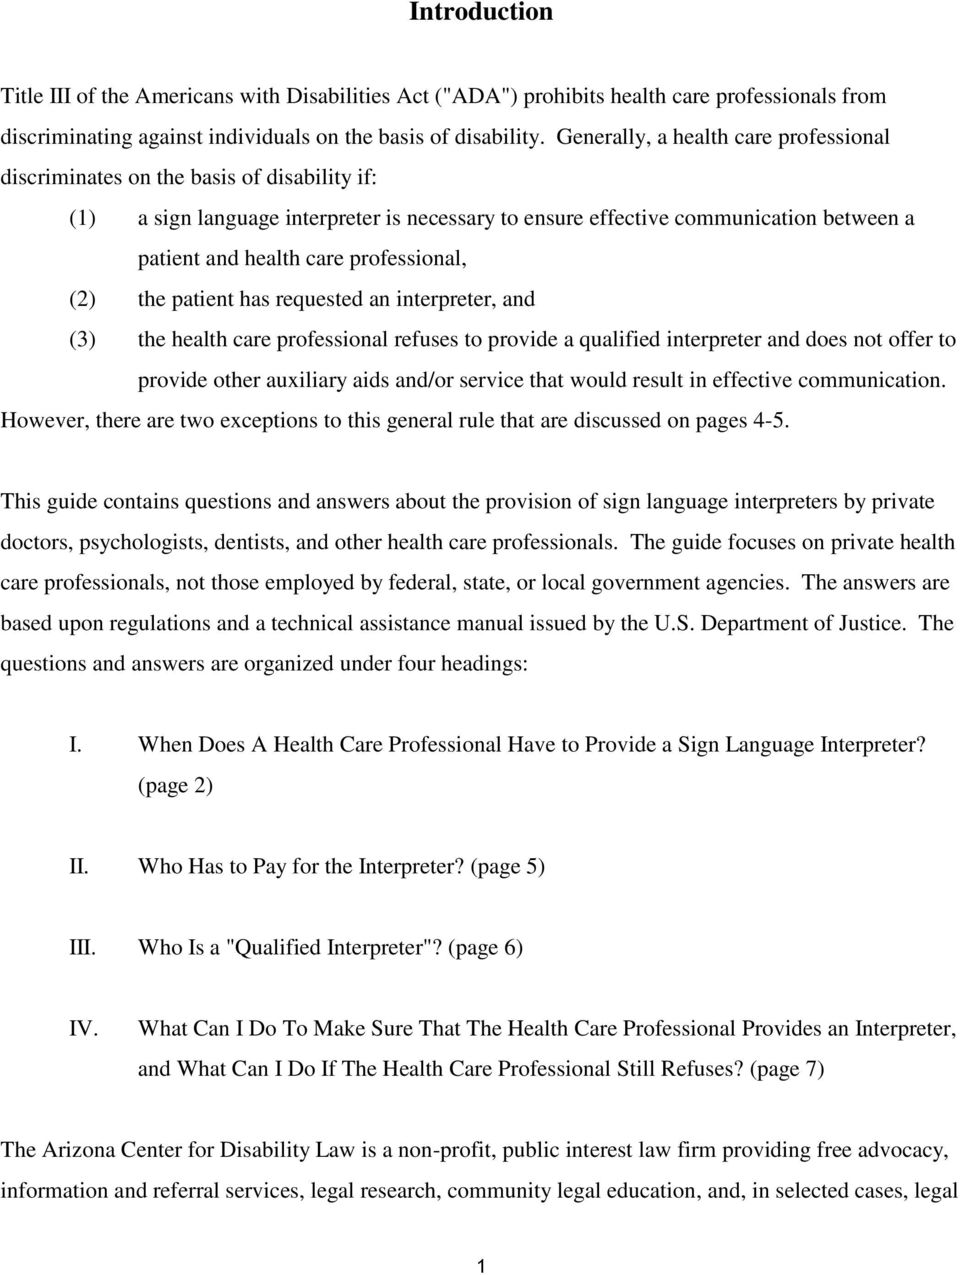 professional, (2) the patient has requested an interpreter, and (3) the health care professional refuses to provide a qualified interpreter and does not offer to provide other auxiliary aids and/or